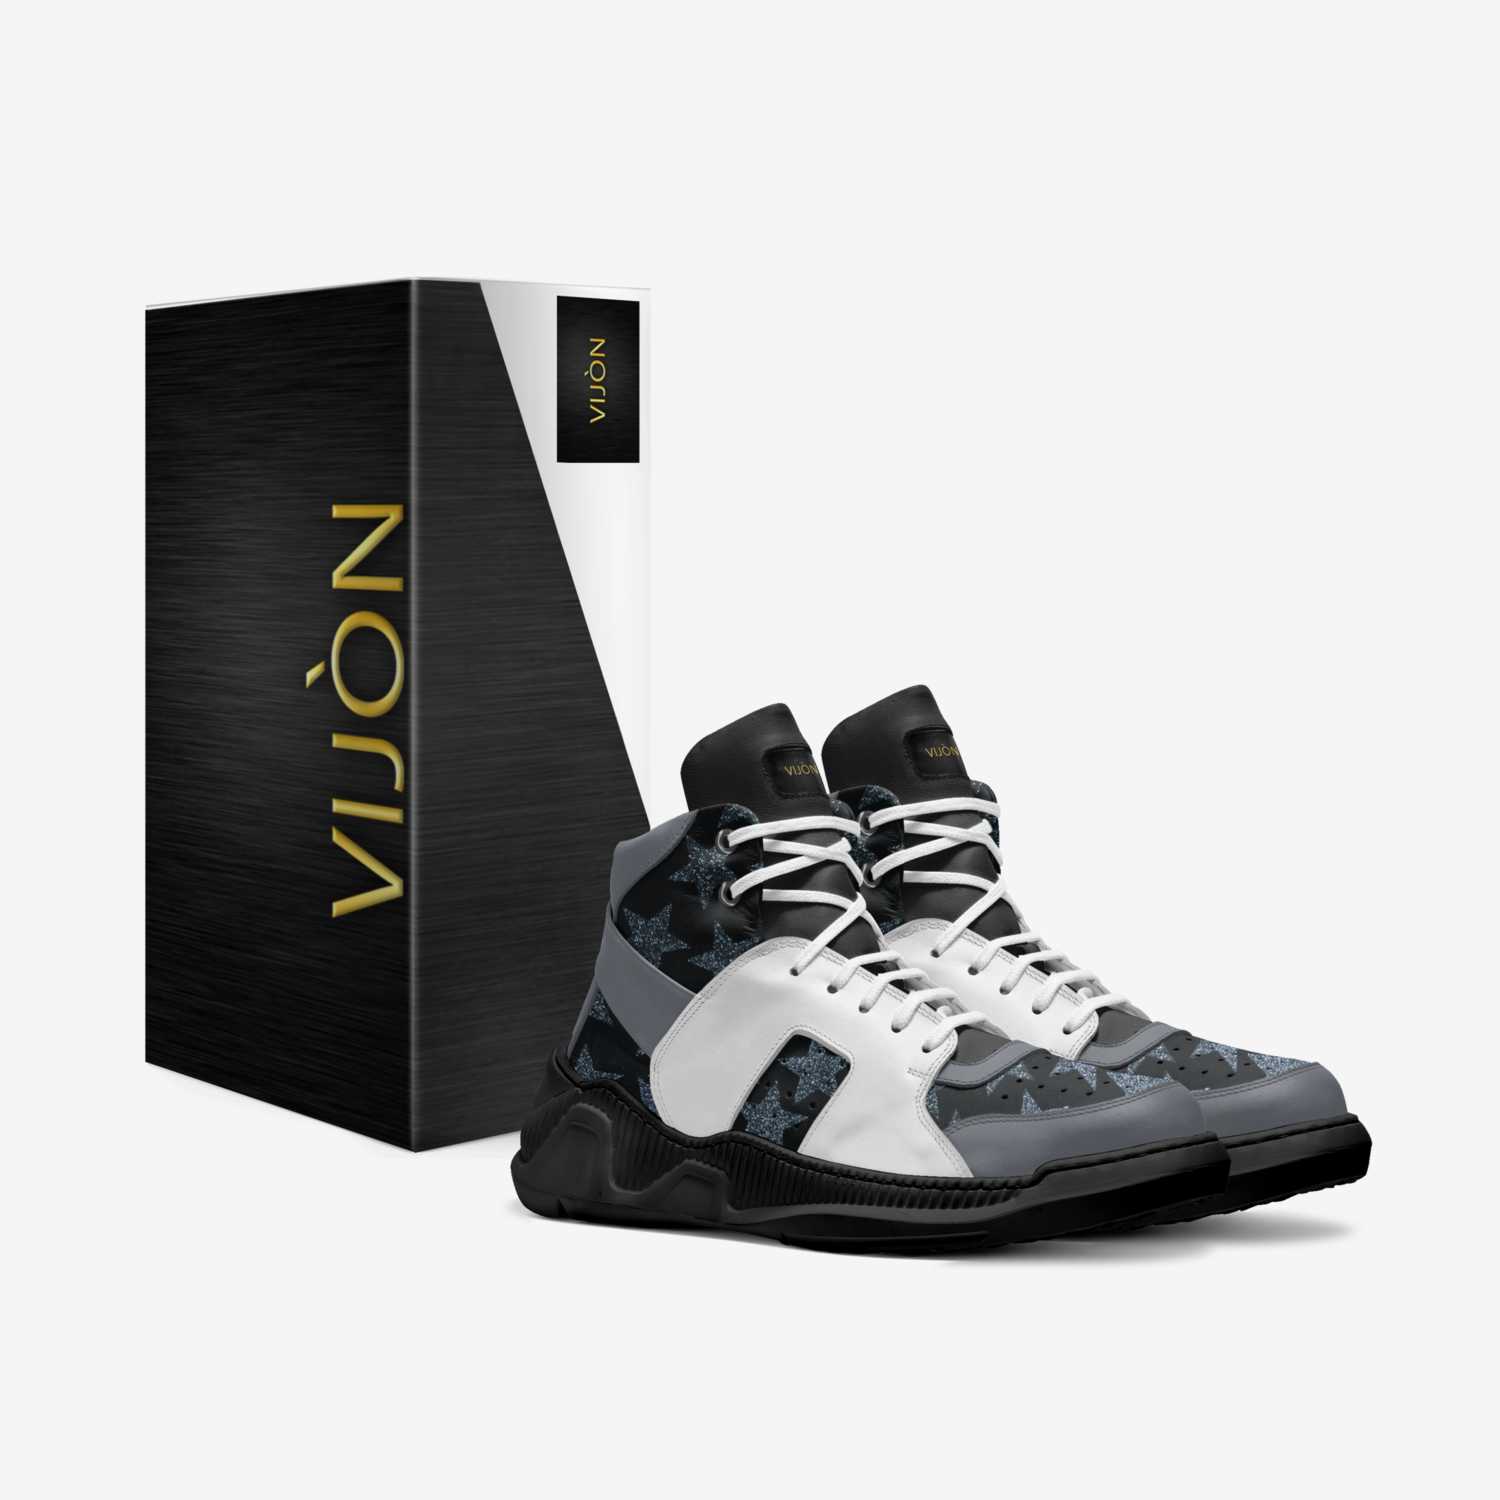 VIJÒN custom made in Italy shoes by Josiah Lee | Box view